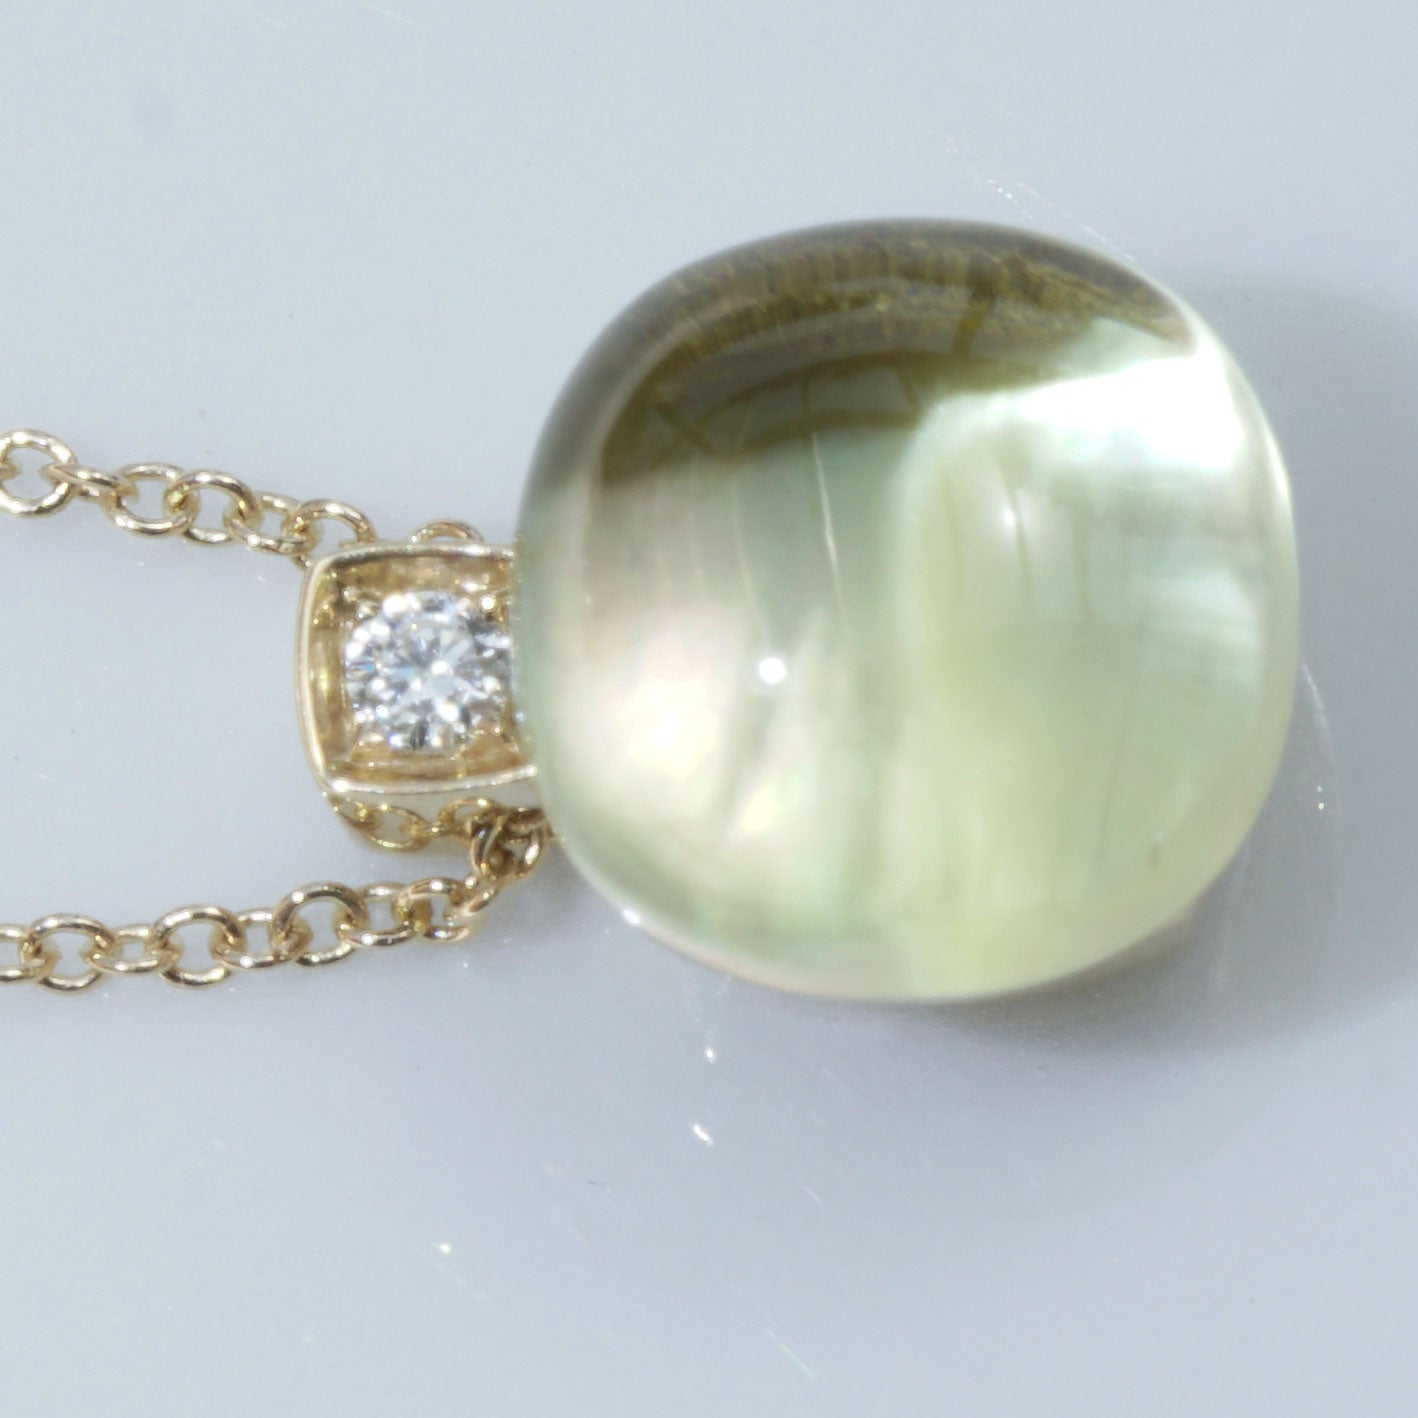 a timeless piece of jewelry, made in a traditional goldsmith manufactory in Valenza/Italy, hallmarked with the Schmuckzicke logo, a square lemon quartz cabochon in the sought-after color yellow-greenish, approx. 4.62 ct, AAA+, underlaid with